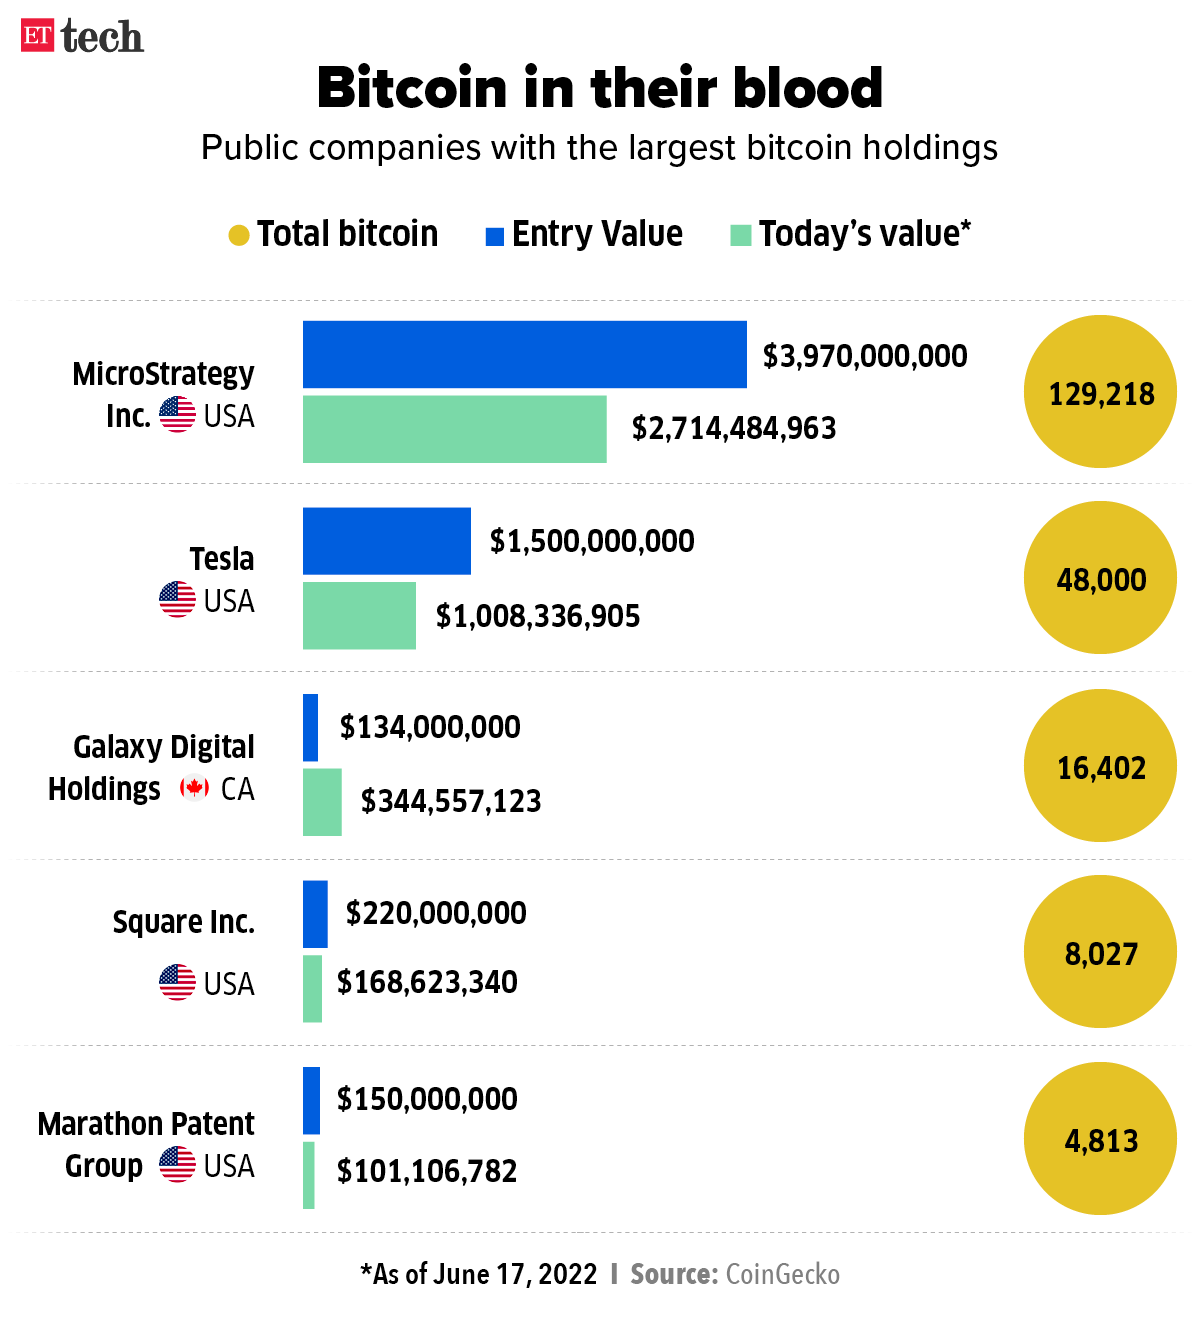 who owns the majority of bitcoins